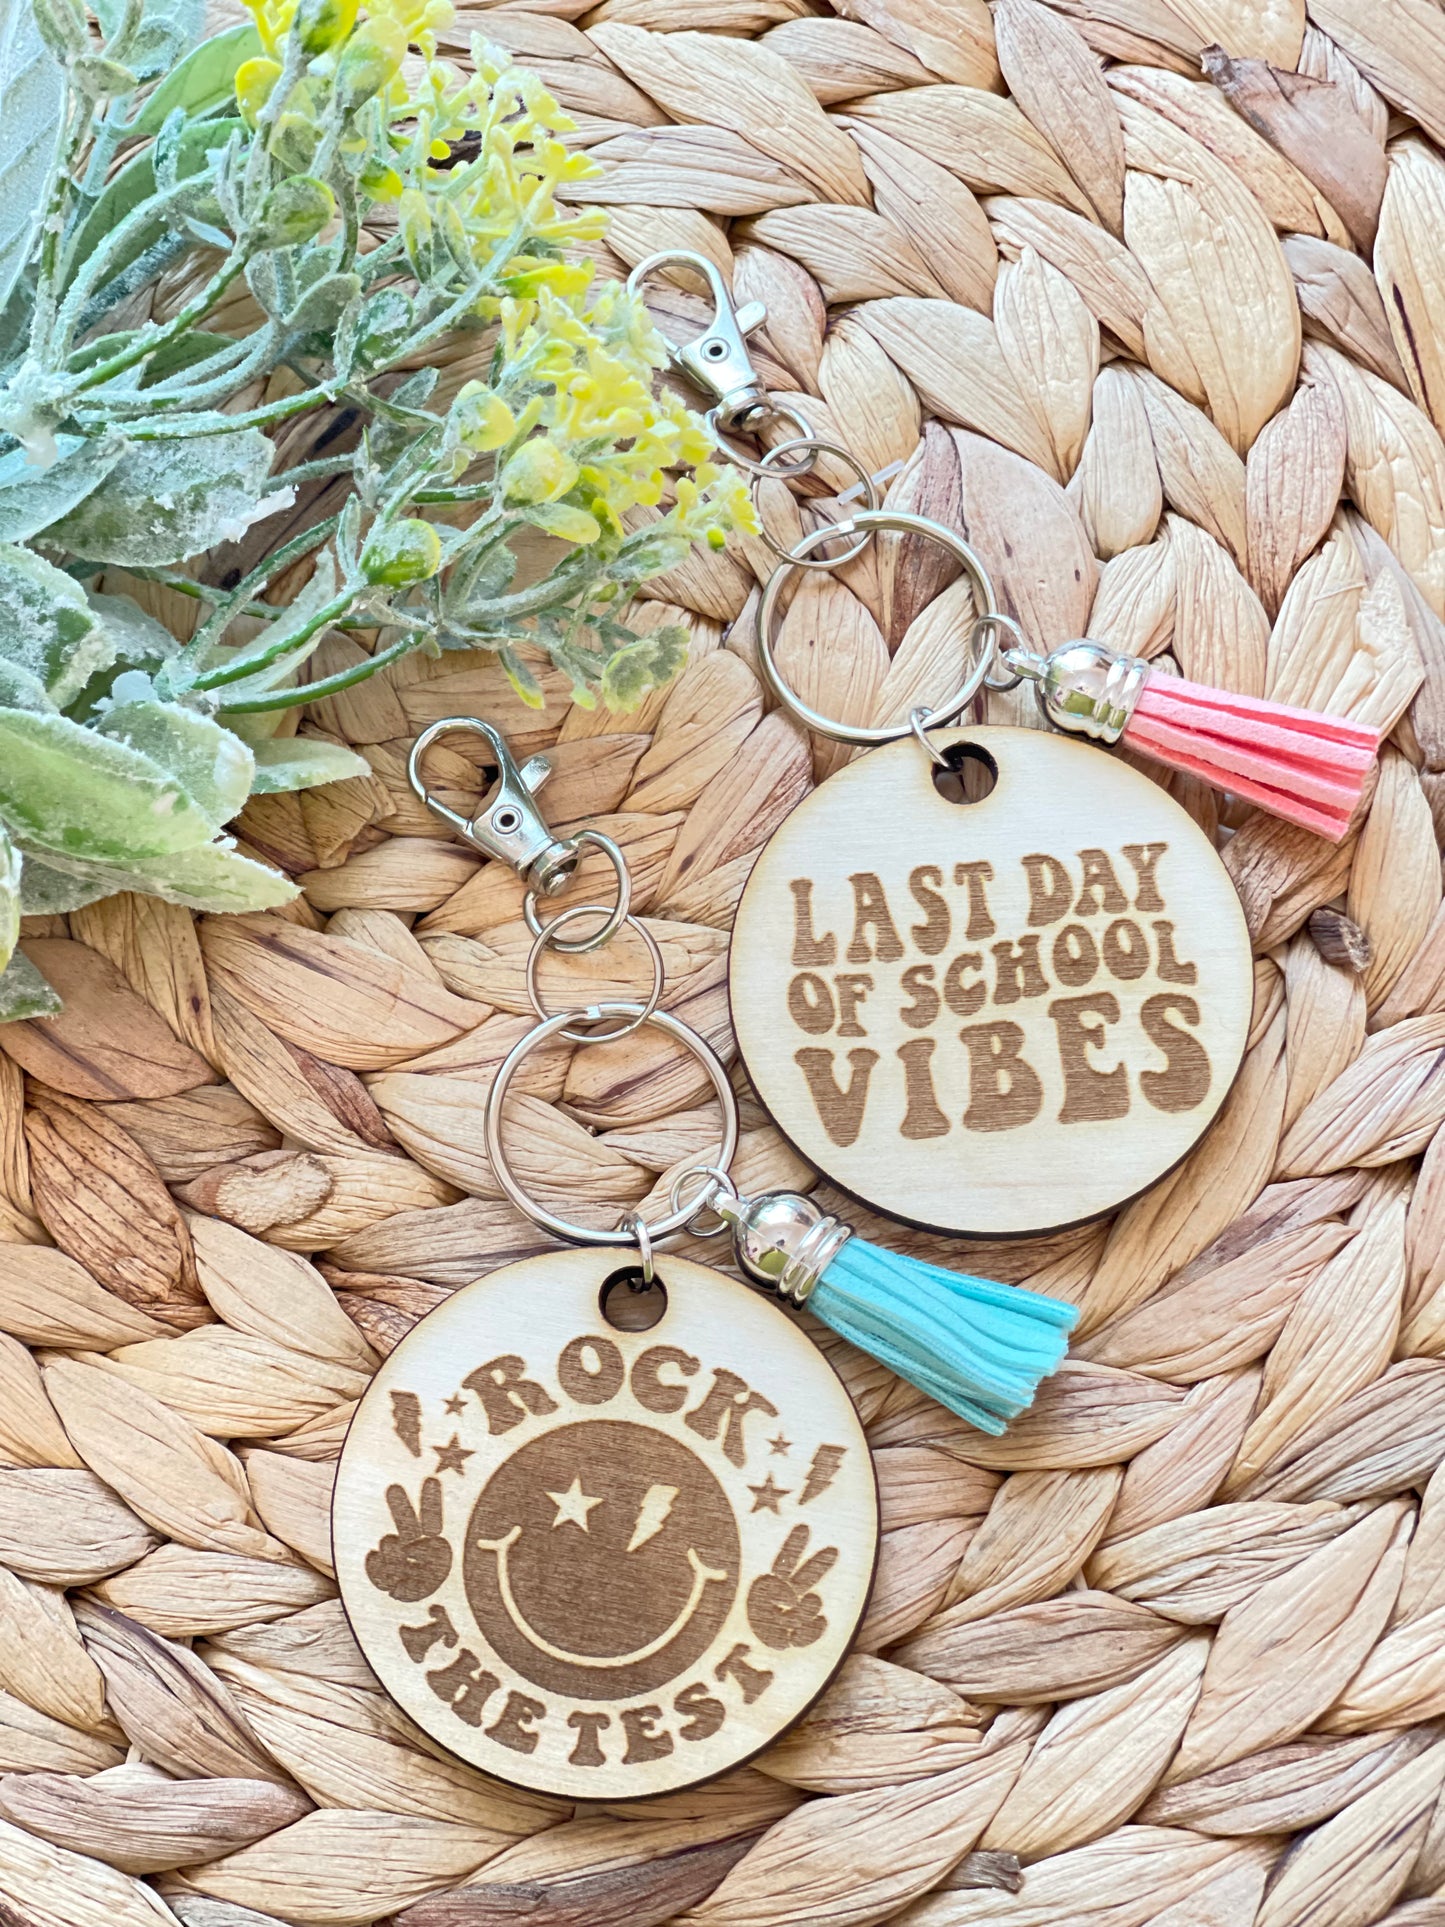 Last Day of School Vibes/Rock the Test Keychains